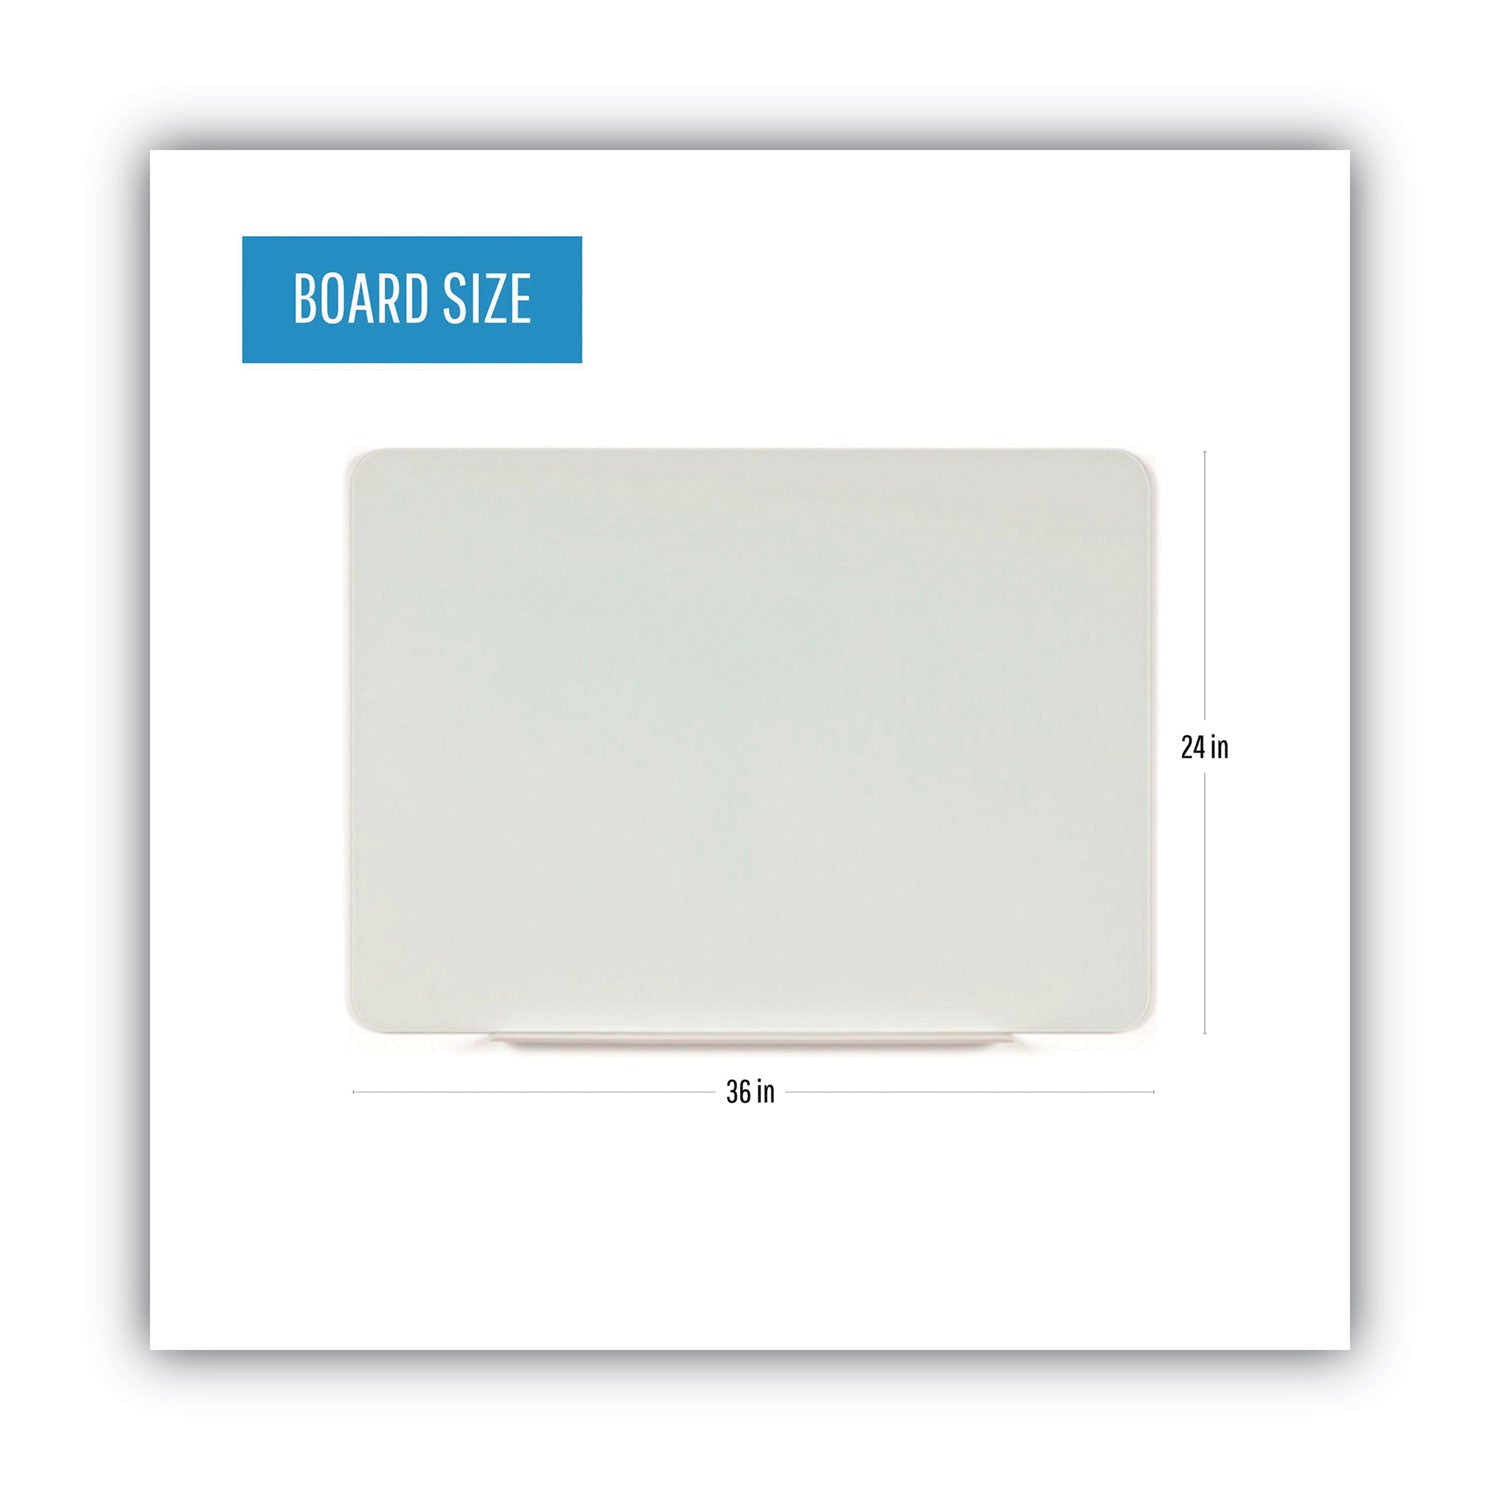 magnetic-glass-dry-erase-board-36-x-24-opaque-white-surface_bvcgl070101 - 2